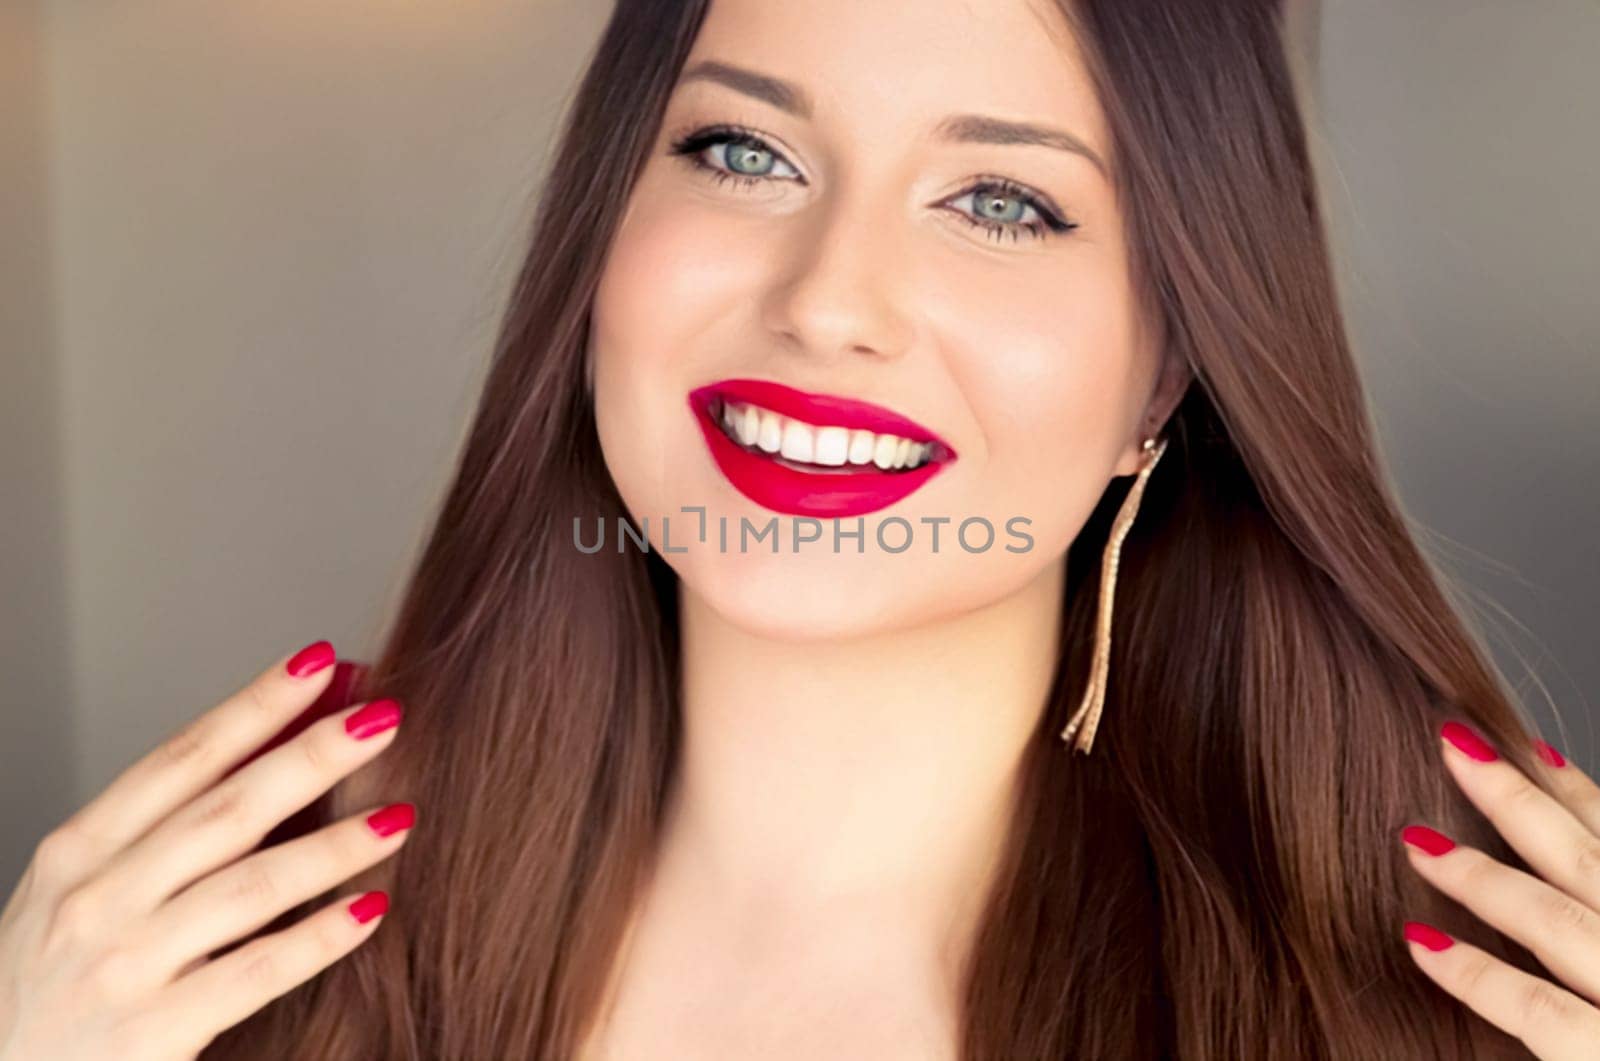 Beauty, makeup and smiles, face portrait of happy woman smiling, natural white teeth smile for dental cosmetics, skin care, glamour style and fashion look idea